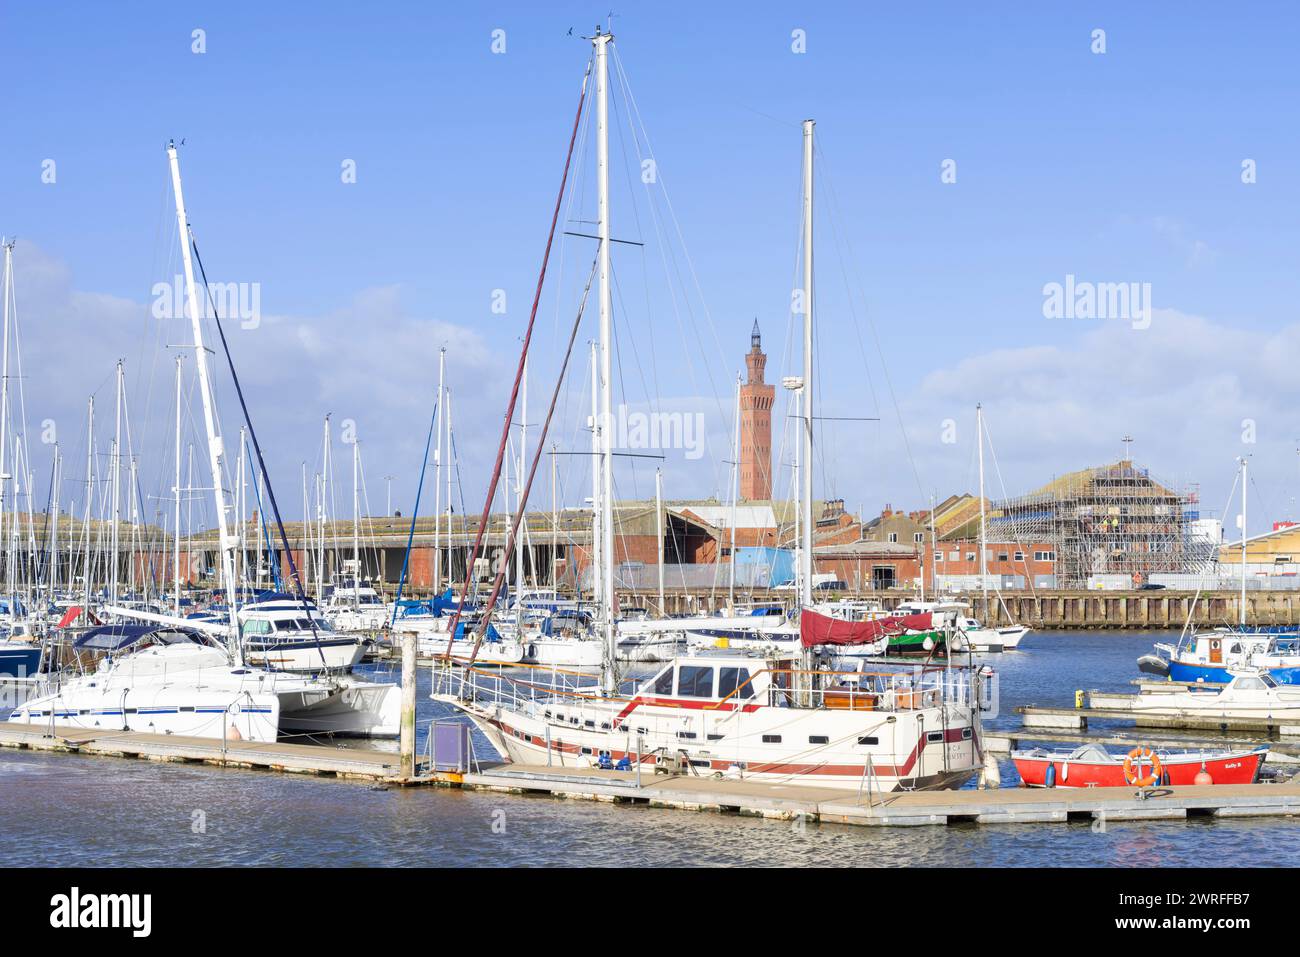 Grimsby docks Grimsby Dock tower behind the yachts in the Humber Cruising Association marina old Fish Dock No1 Grimsby North Lincolnshire England UK Stock Photo